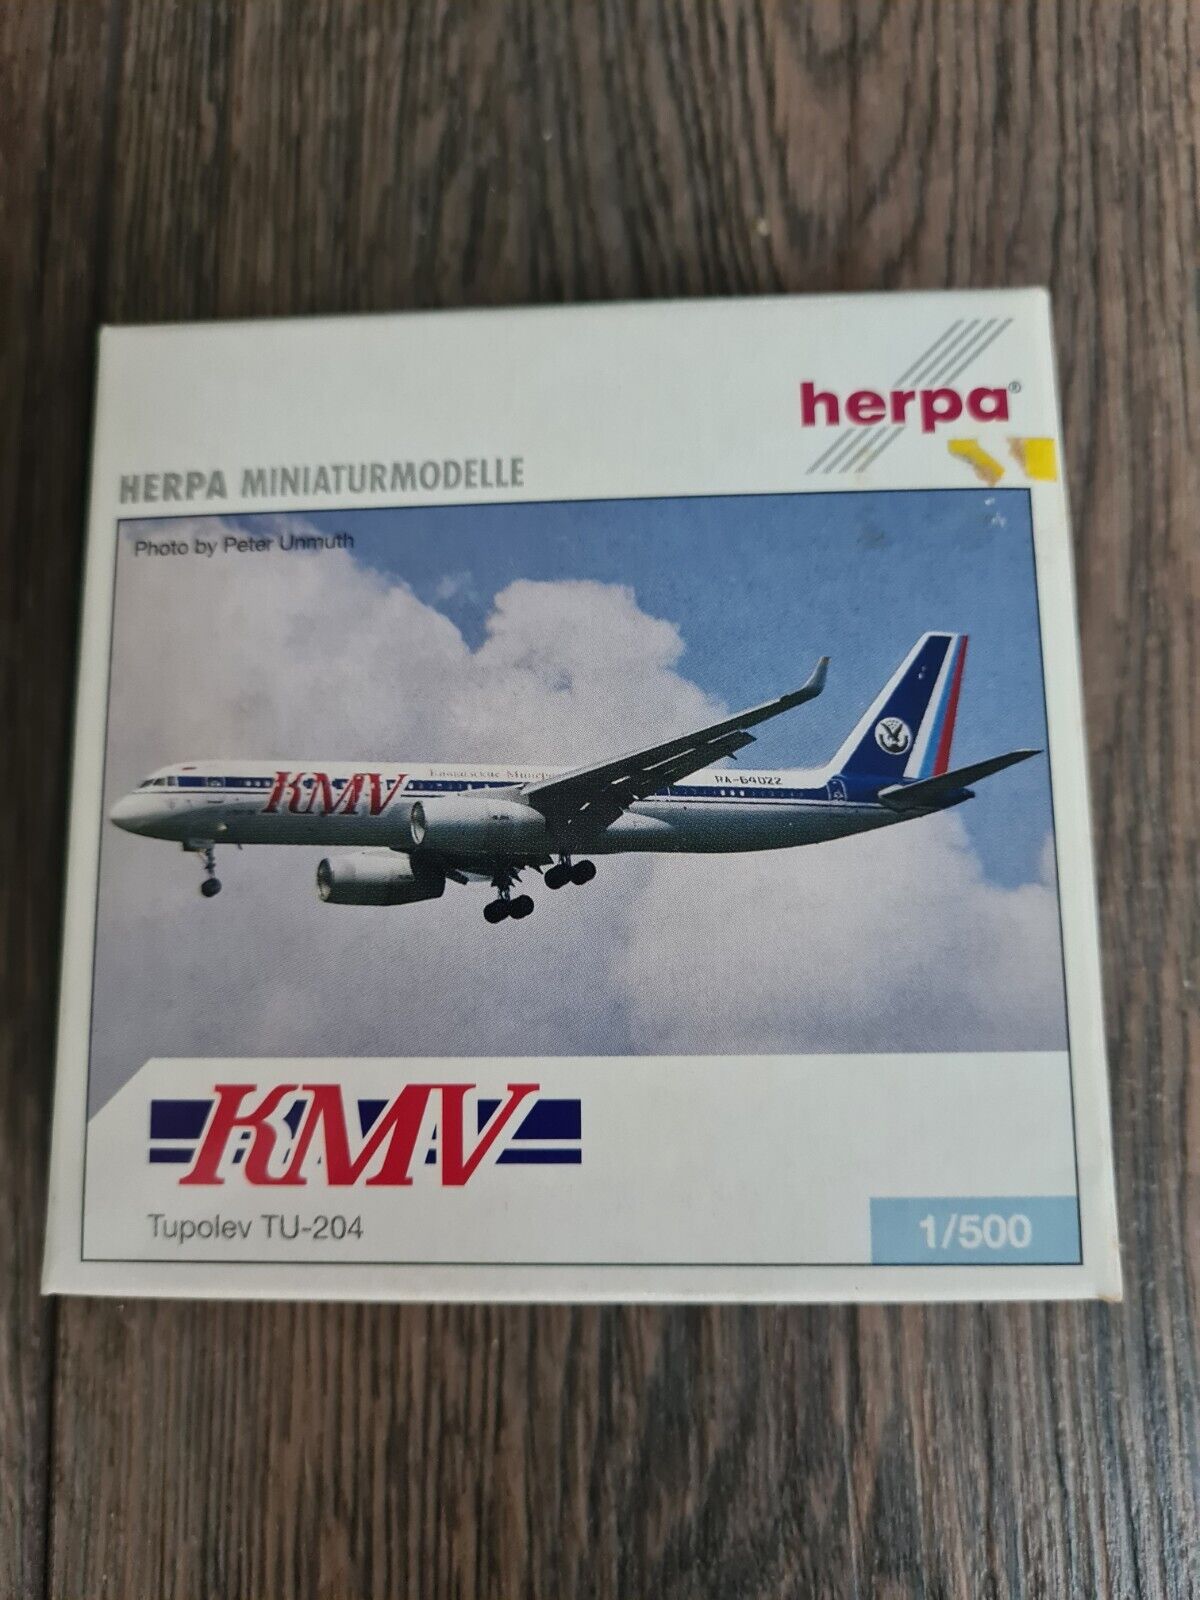 Herpa KMV AIRLINES Tupolev TU-204 Aircraft Model 1:500 Scale RARE boxed mint